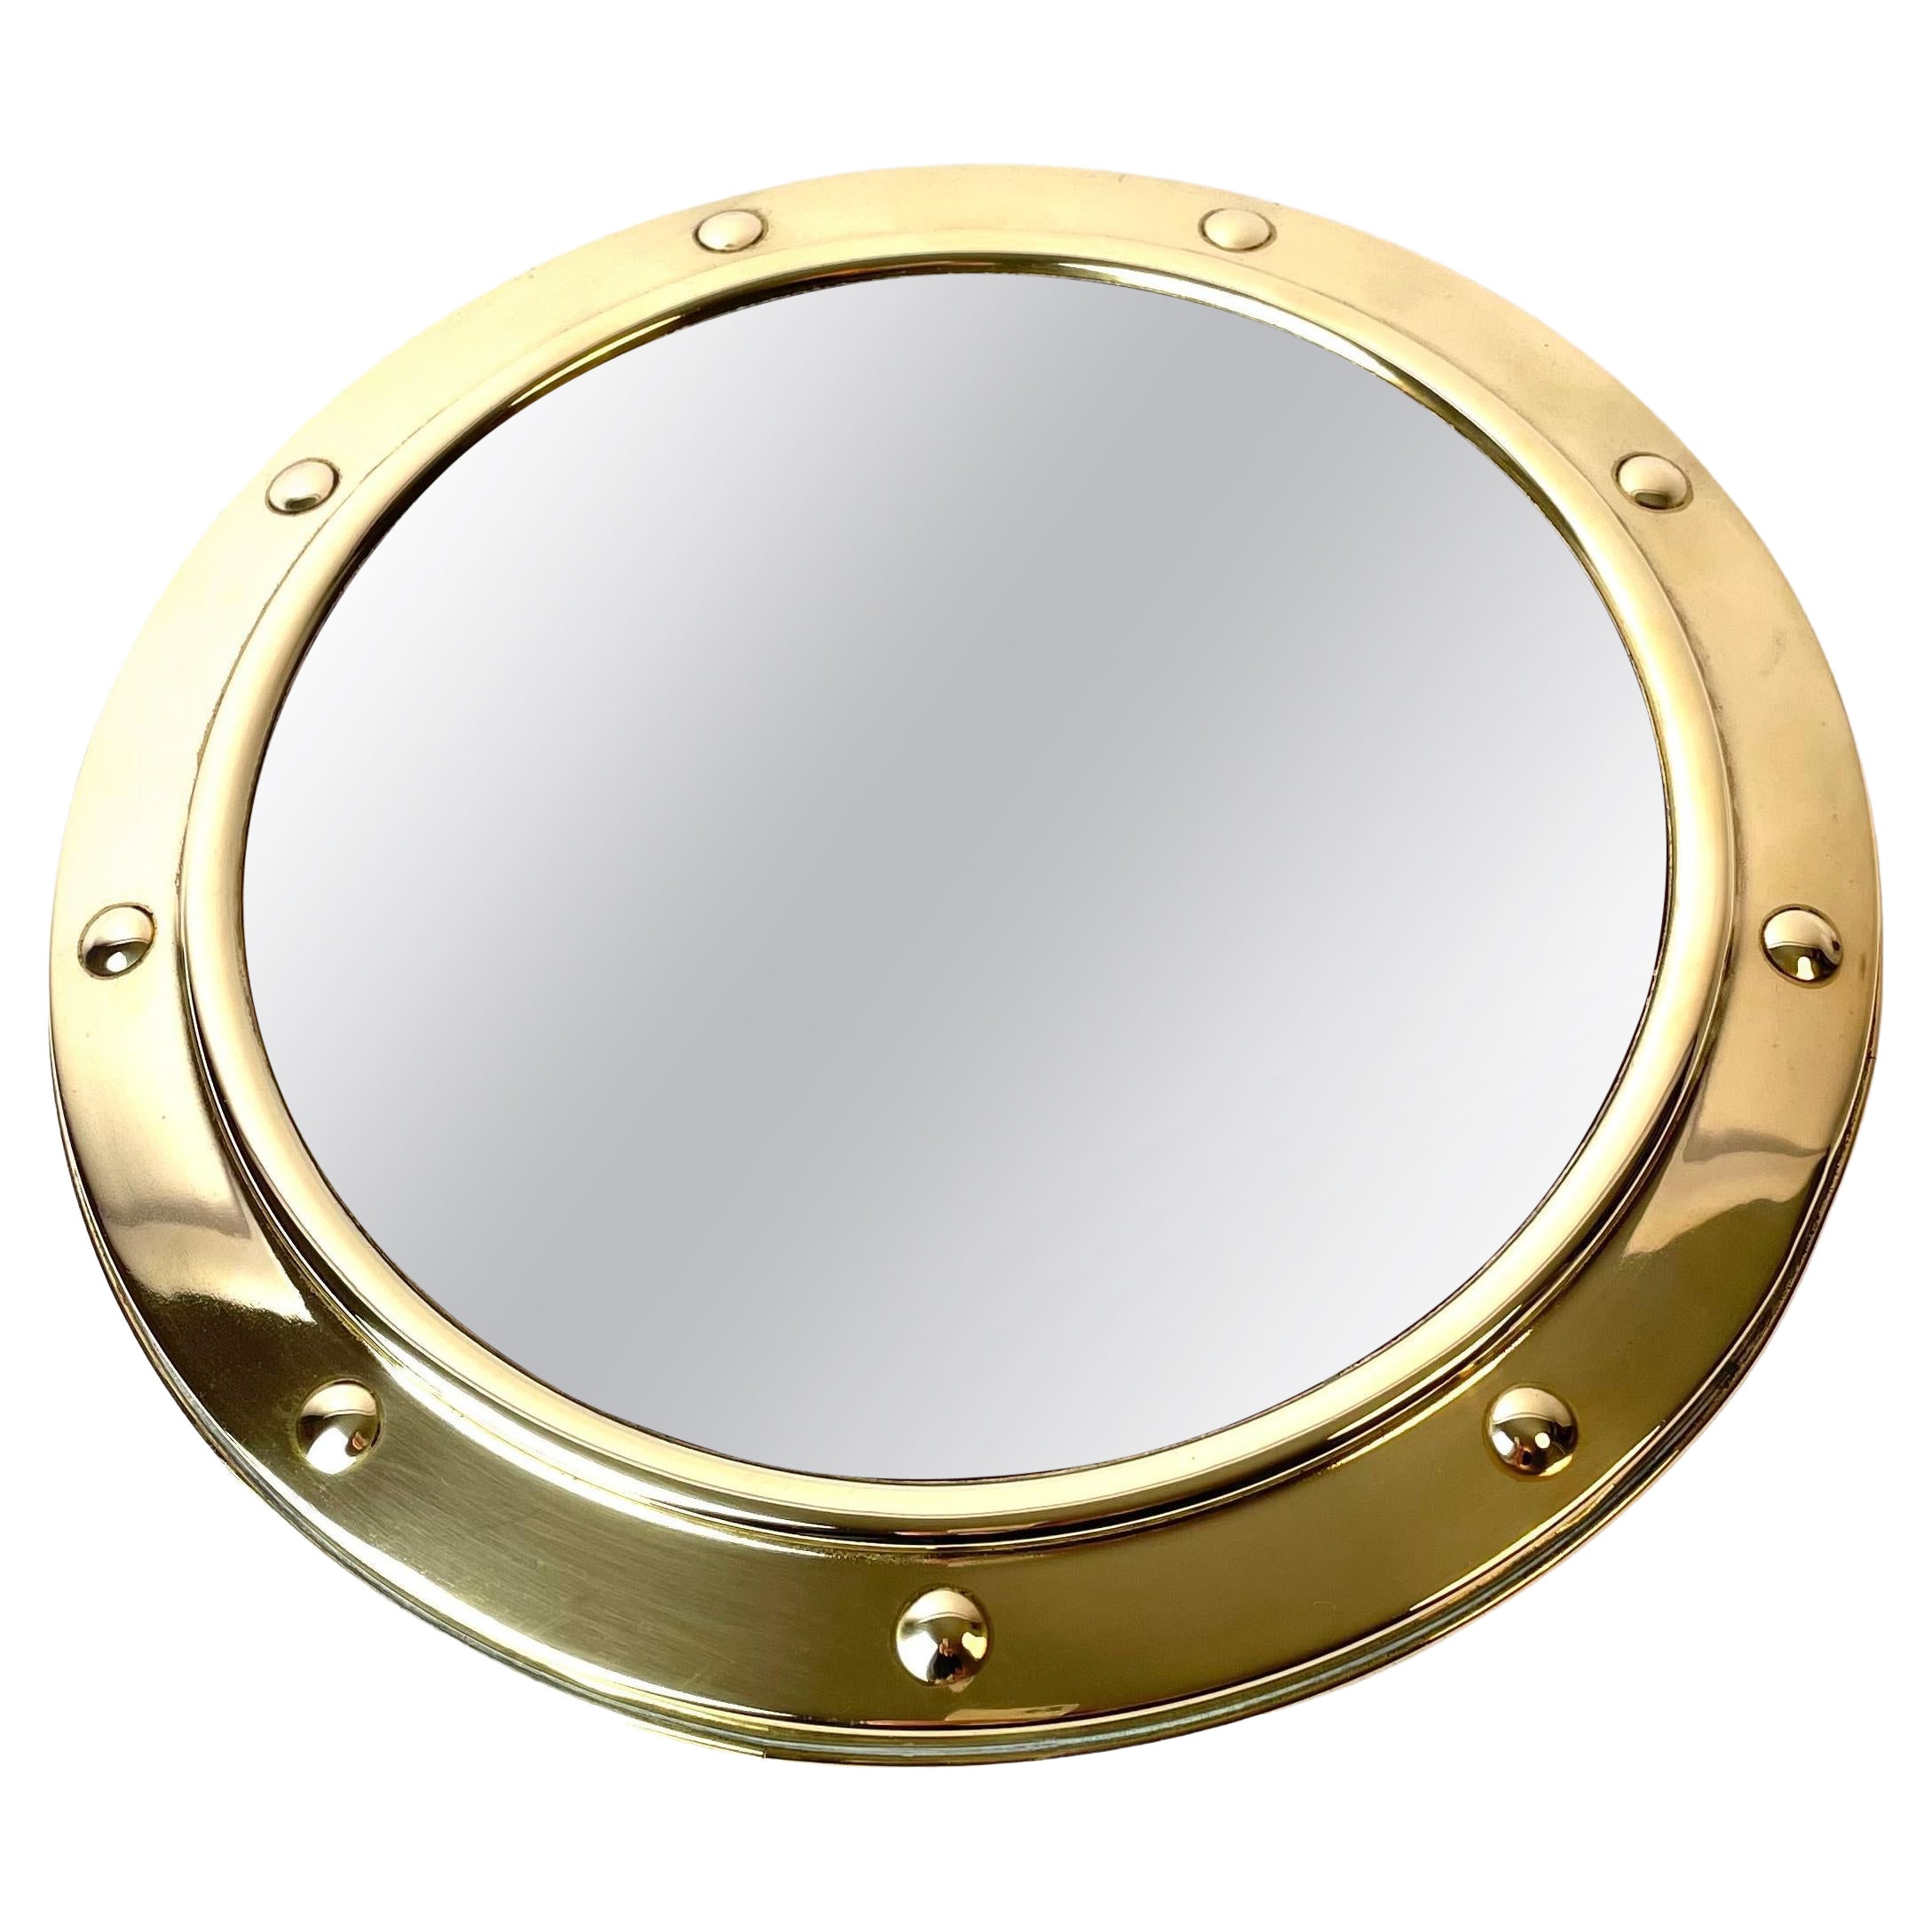 Mid-20th Century Porthole Convex Wall Mirror in Brass For Sale